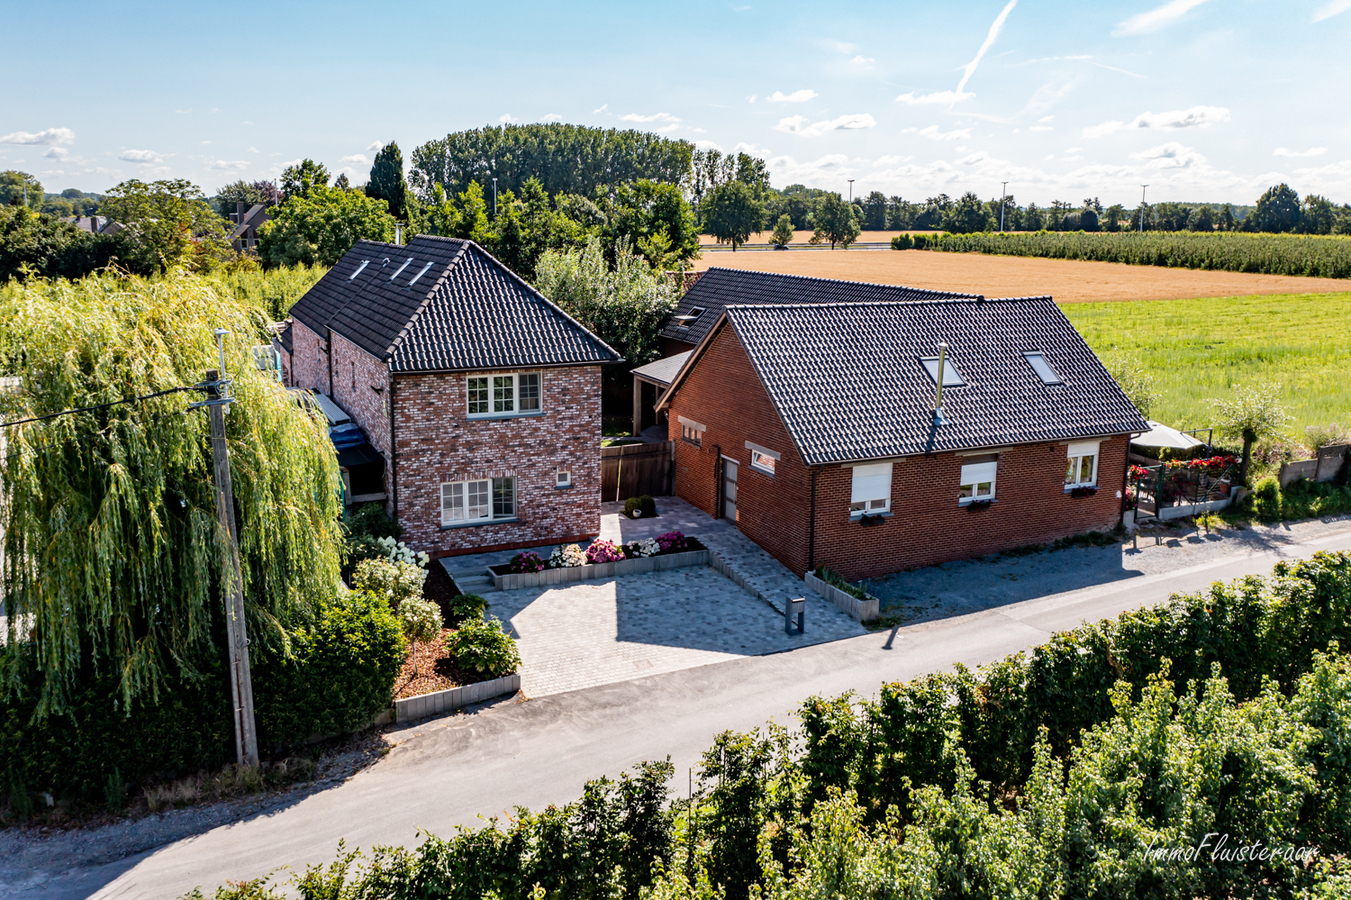 Property for sale |  with option - with restrictions in Zottegem